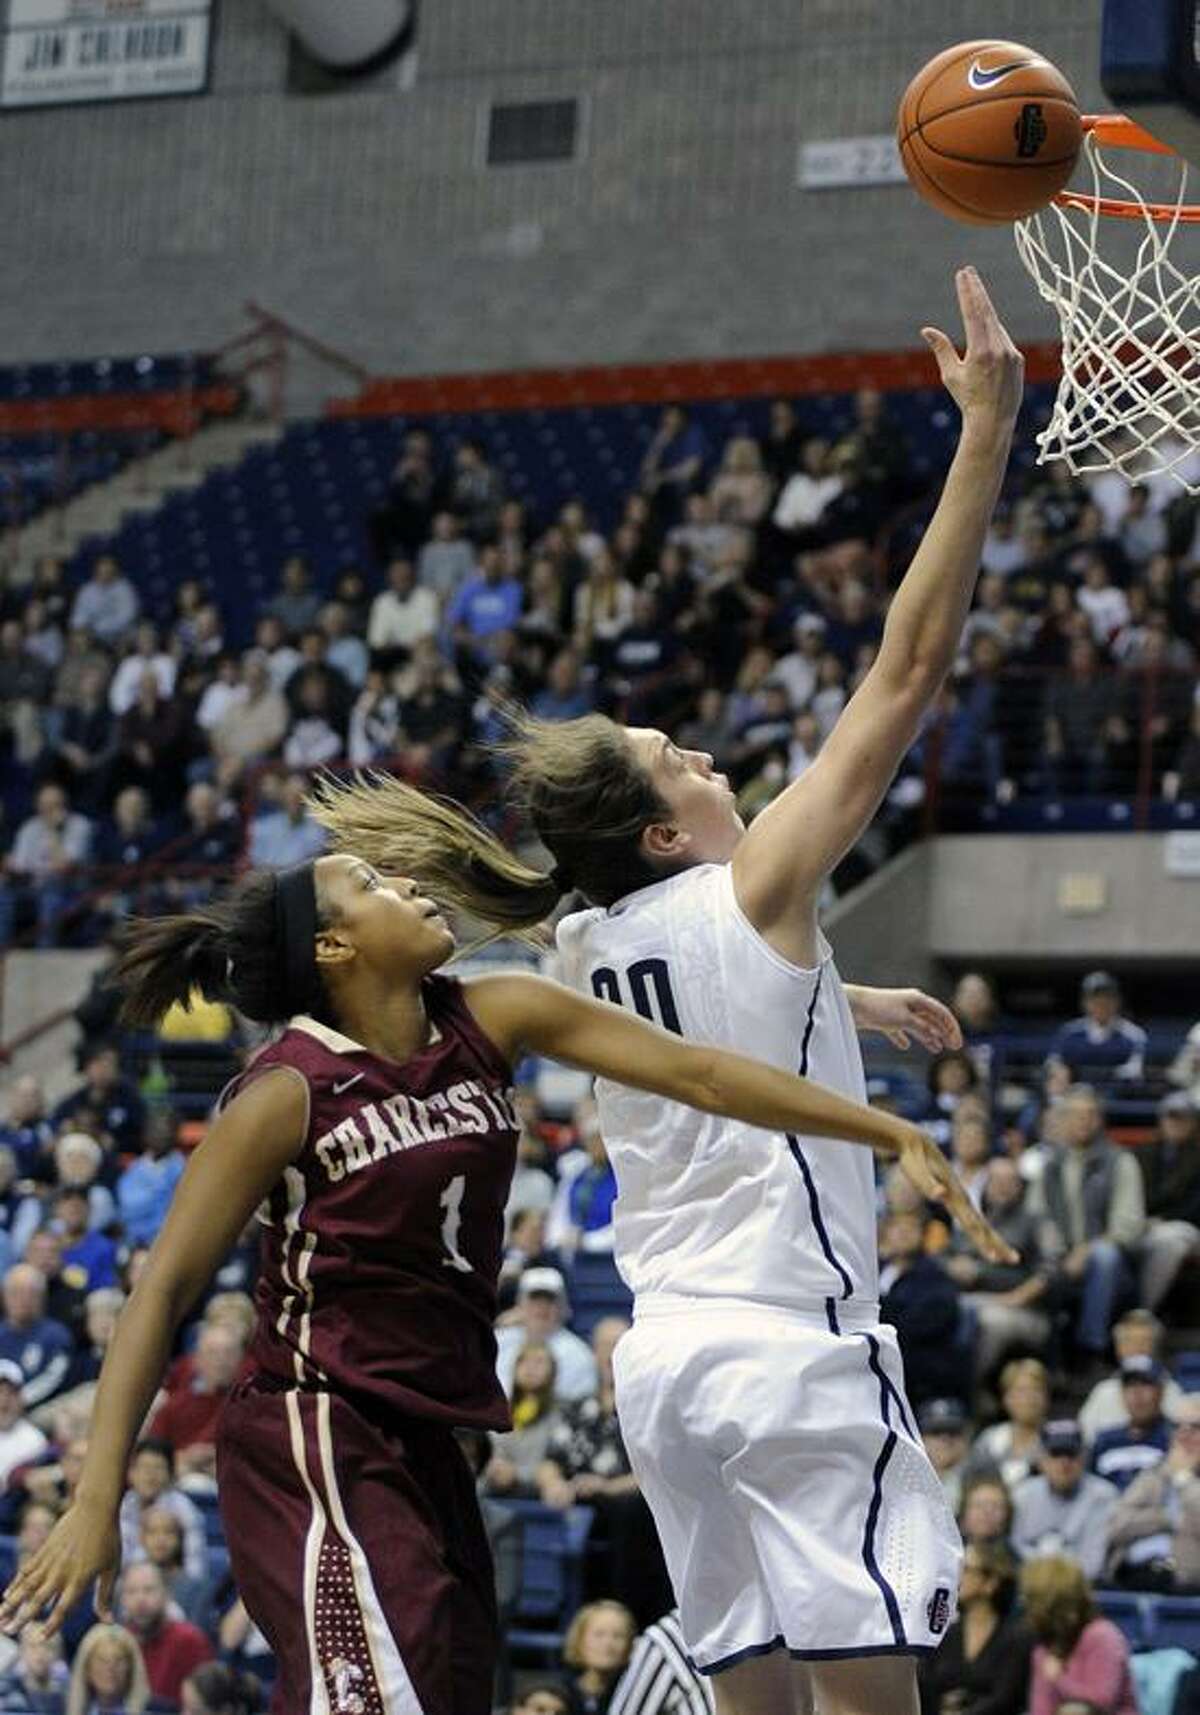 Connecticut's Breanna Stewart, right, drives past Charleston's Alyssa Frye during the first half of an NCAA college basketball game in Storrs, Conn., Sunday, Nov. 11, 2012. Stewart scored a game-high 21 points and Frye a team-high 14 in Connecticut's 103-39 victory. (AP Photo/Fred Beckham)